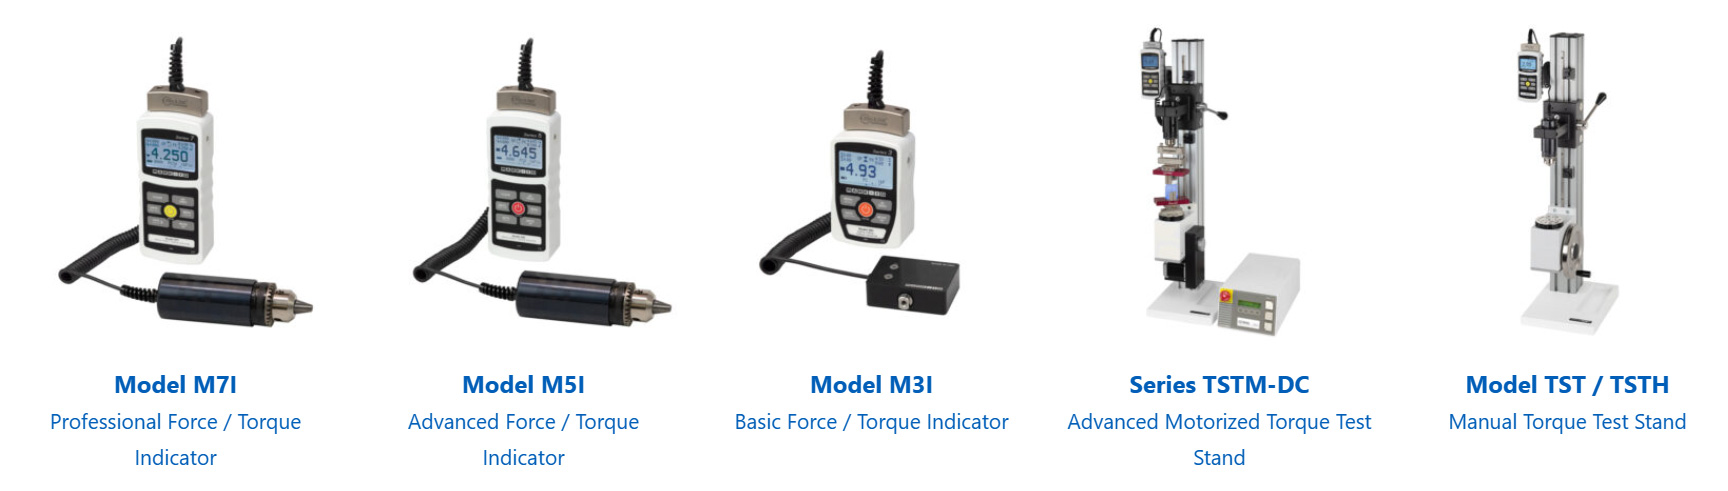 Related products of MR50 Torque Sensors